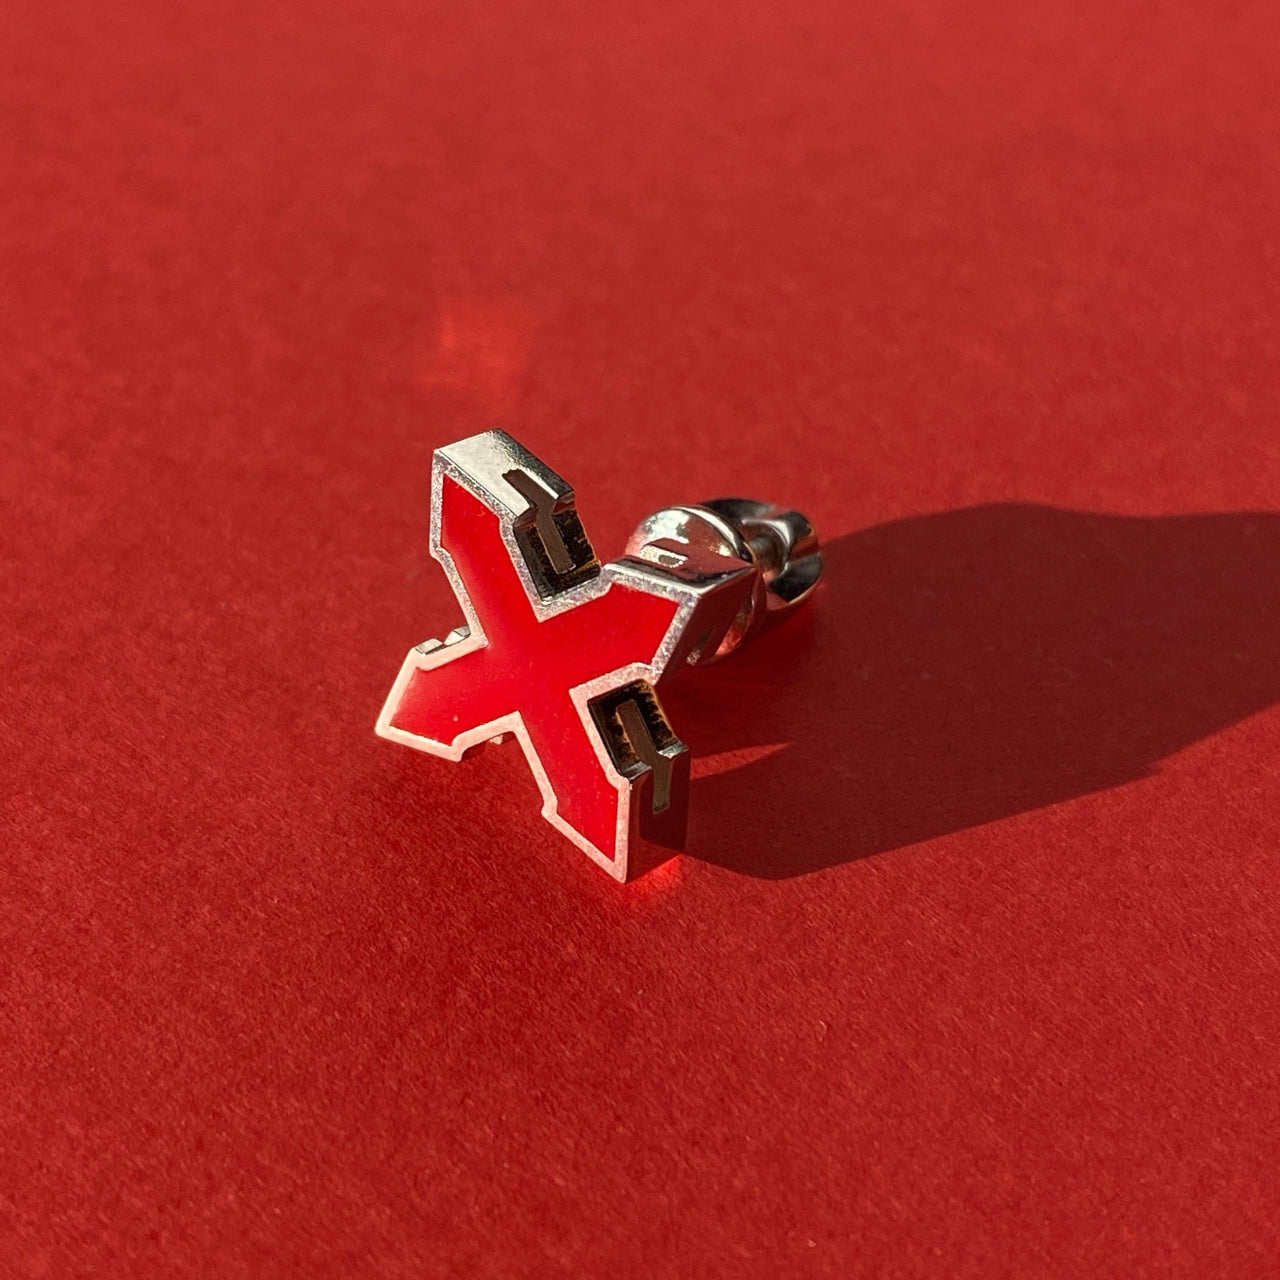 STUD STAR "A DROP OF RED" / SILVER & RED ENAMEL